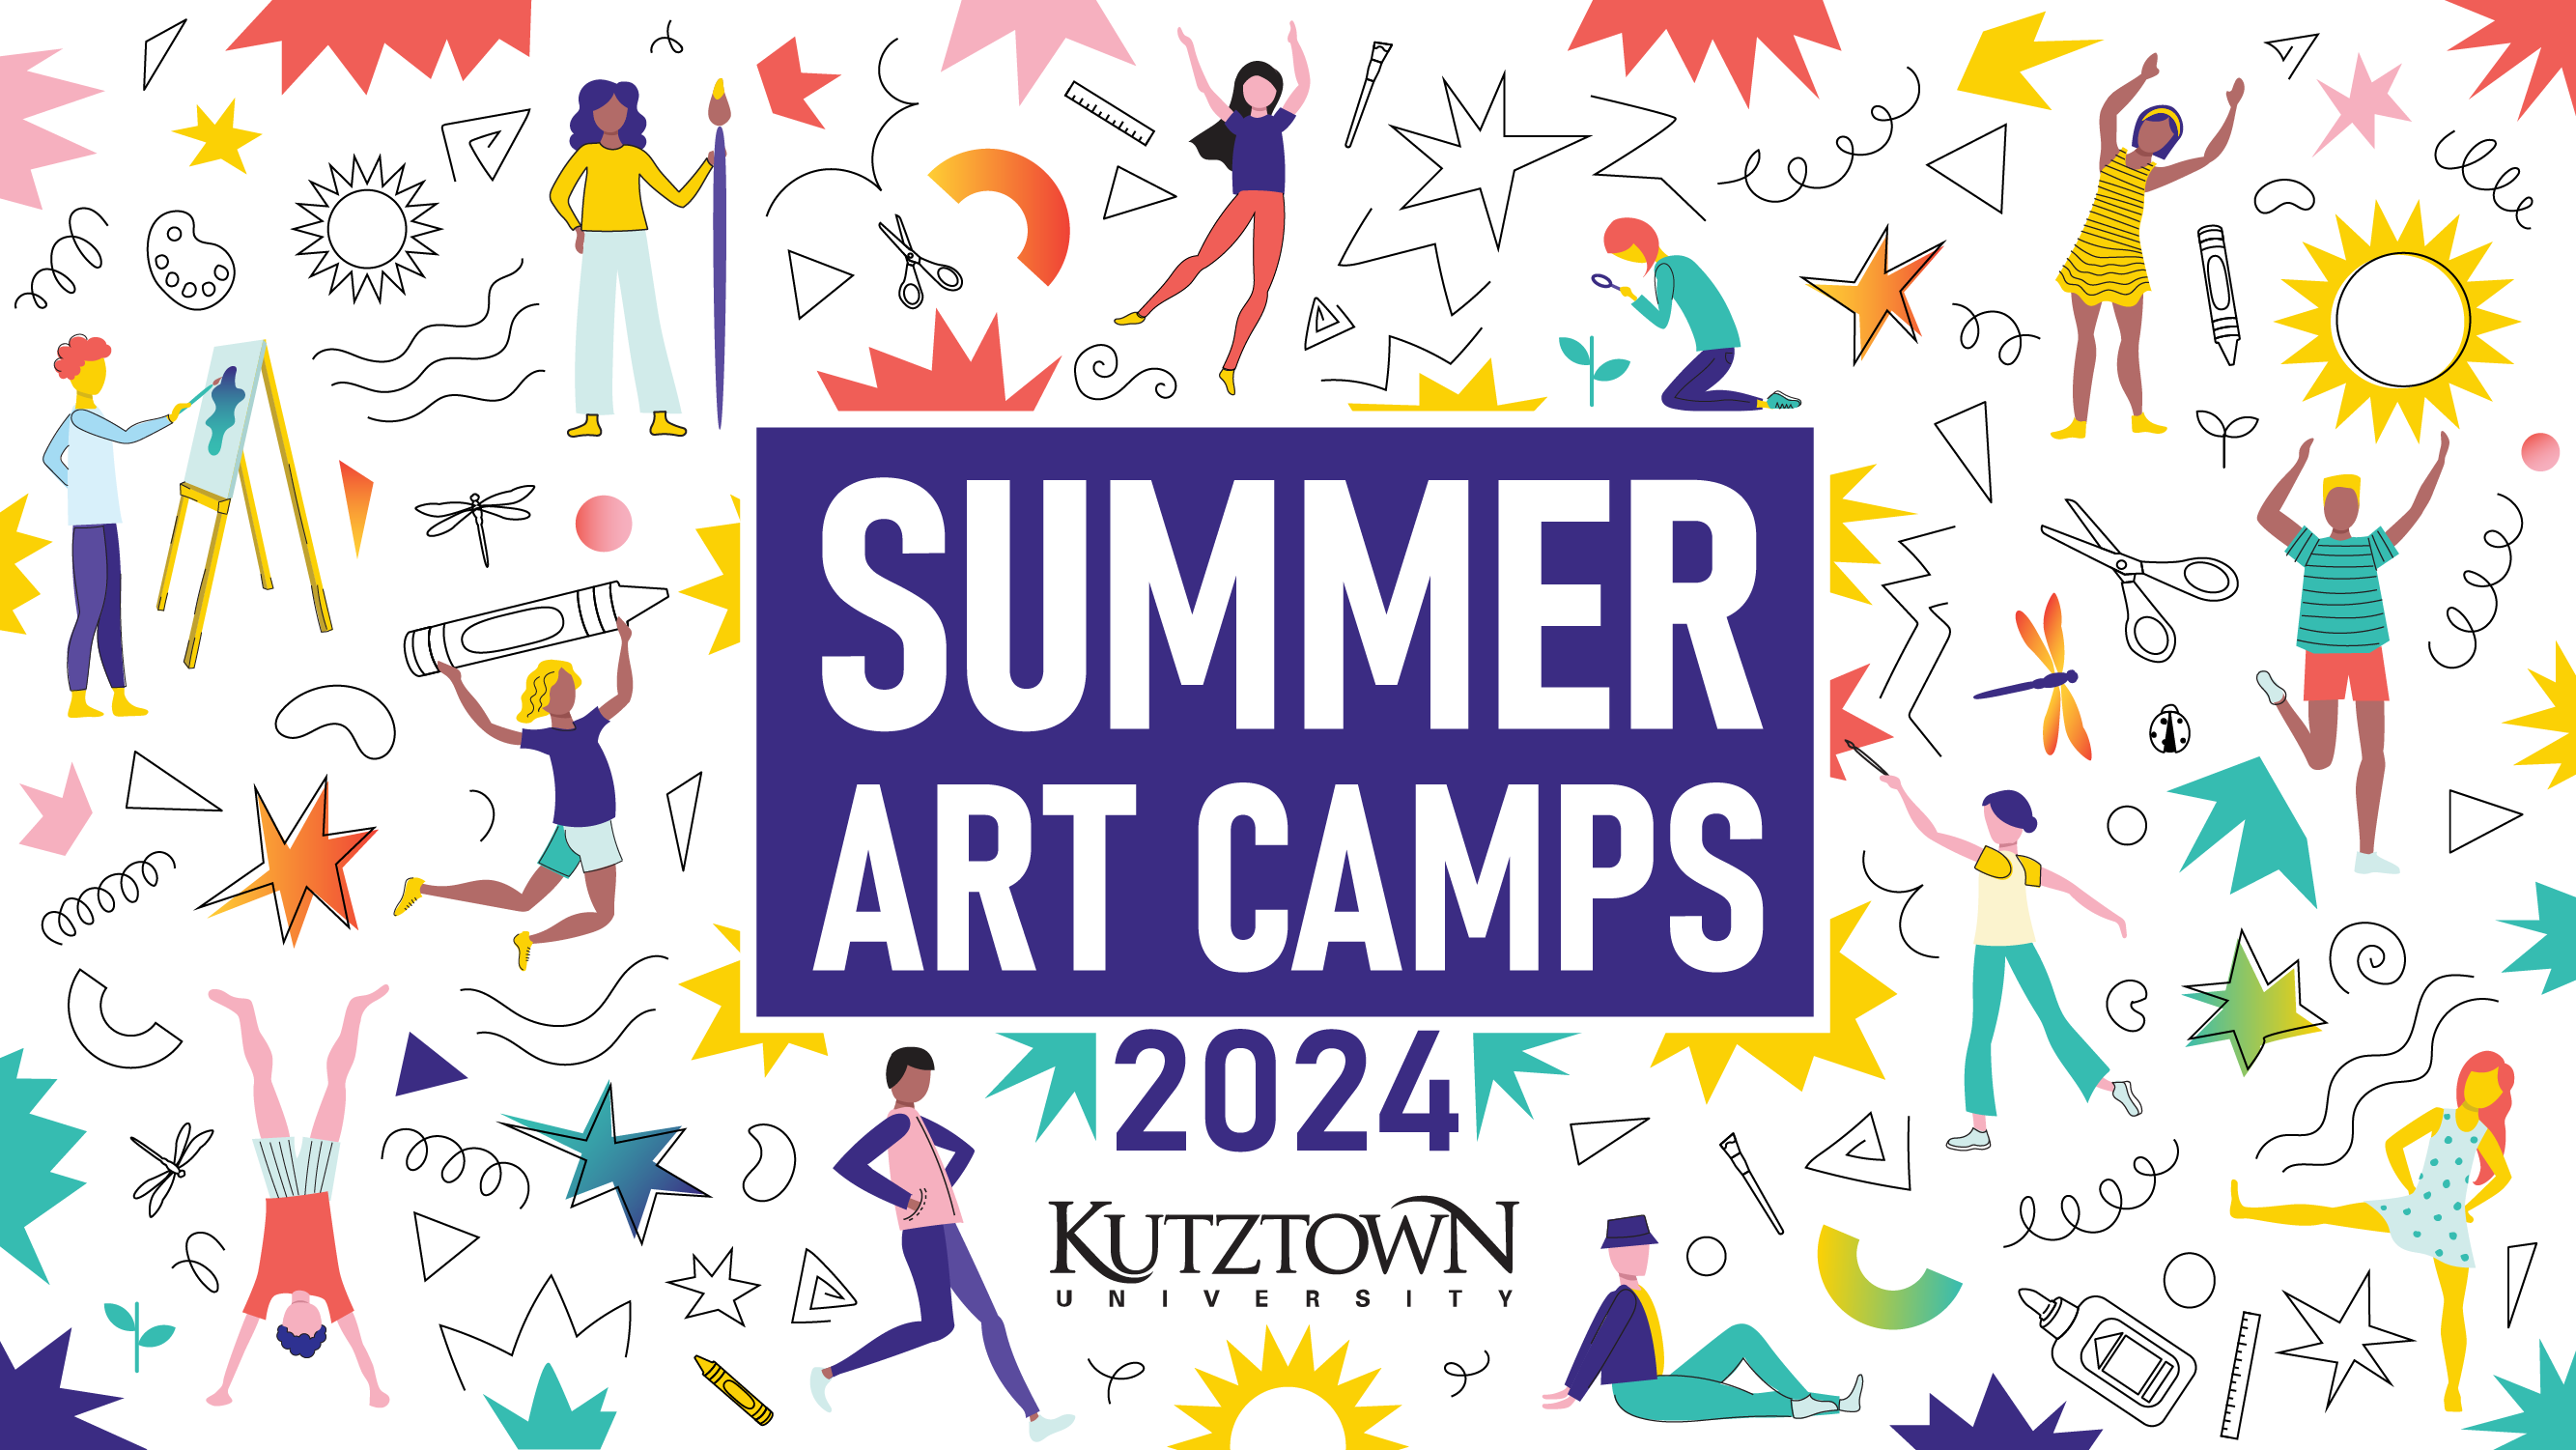 Summer Art Camp 2024 Banner. Flat illustrations of people and art supplies.